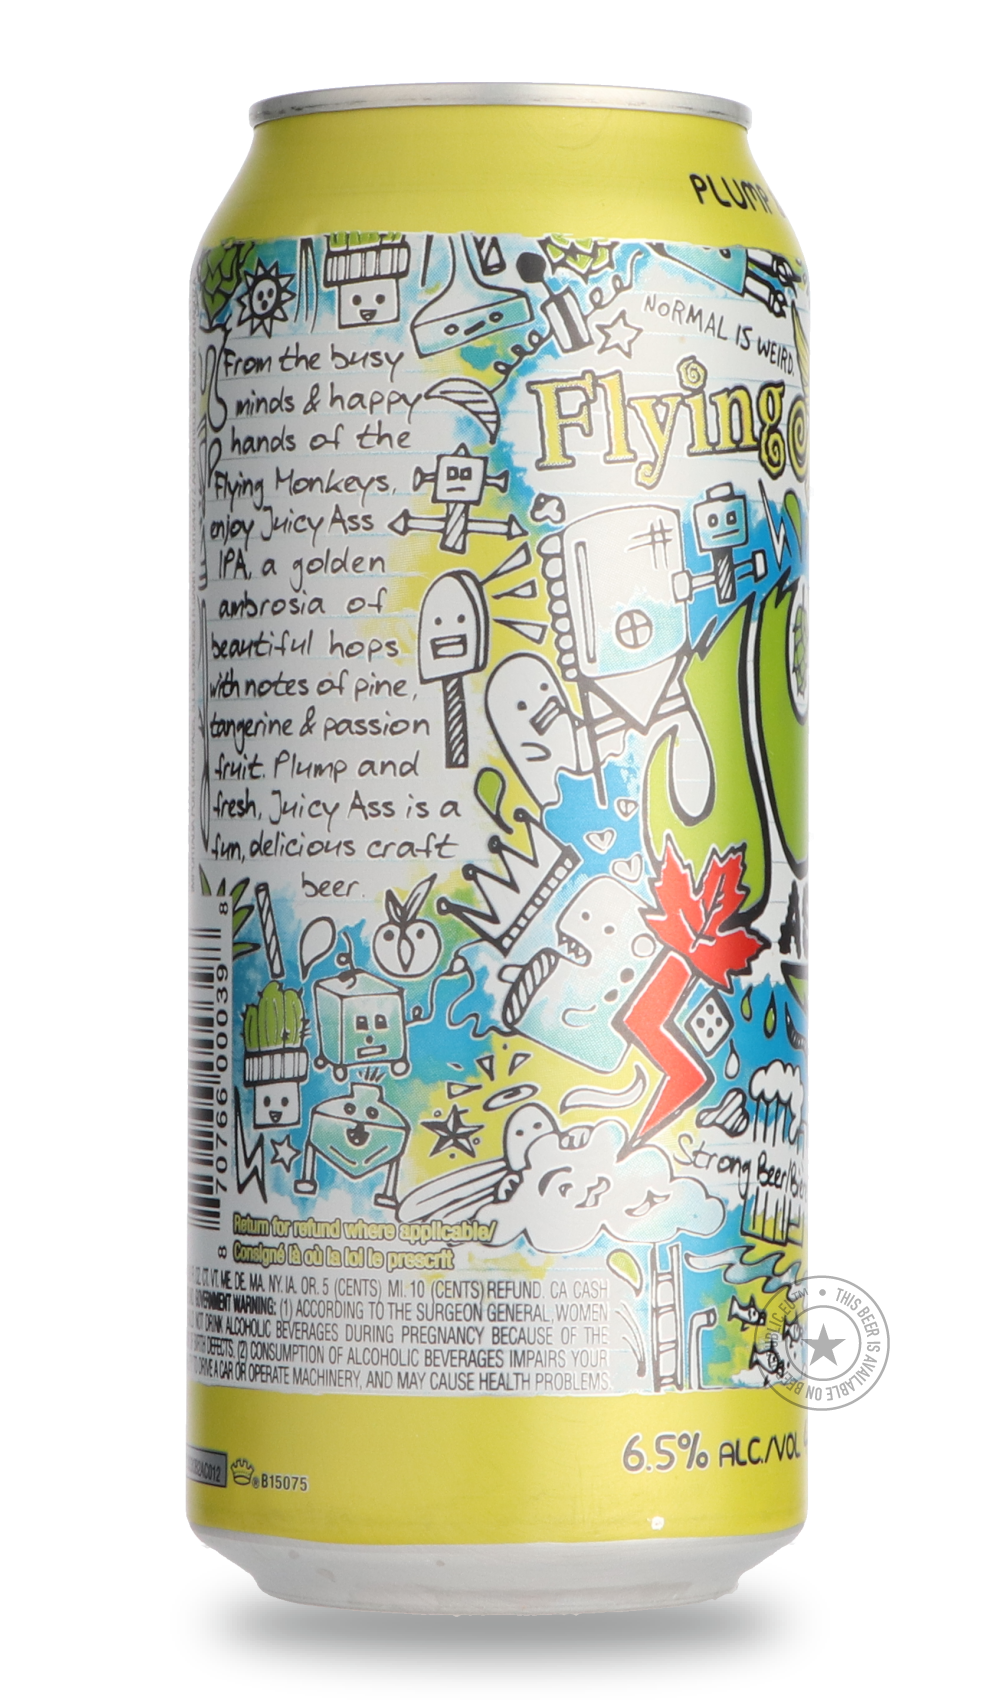 -Flying Monkeys- Juicy Ass-IPA- Only @ Beer Republic - The best online beer store for American & Canadian craft beer - Buy beer online from the USA and Canada - Bier online kopen - Amerikaans bier kopen - Craft beer store - Craft beer kopen - Amerikanisch bier kaufen - Bier online kaufen - Acheter biere online - IPA - Stout - Porter - New England IPA - Hazy IPA - Imperial Stout - Barrel Aged - Barrel Aged Imperial Stout - Brown - Dark beer - Blond - Blonde - Pilsner - Lager - Wheat - Weizen - Amber - Barley